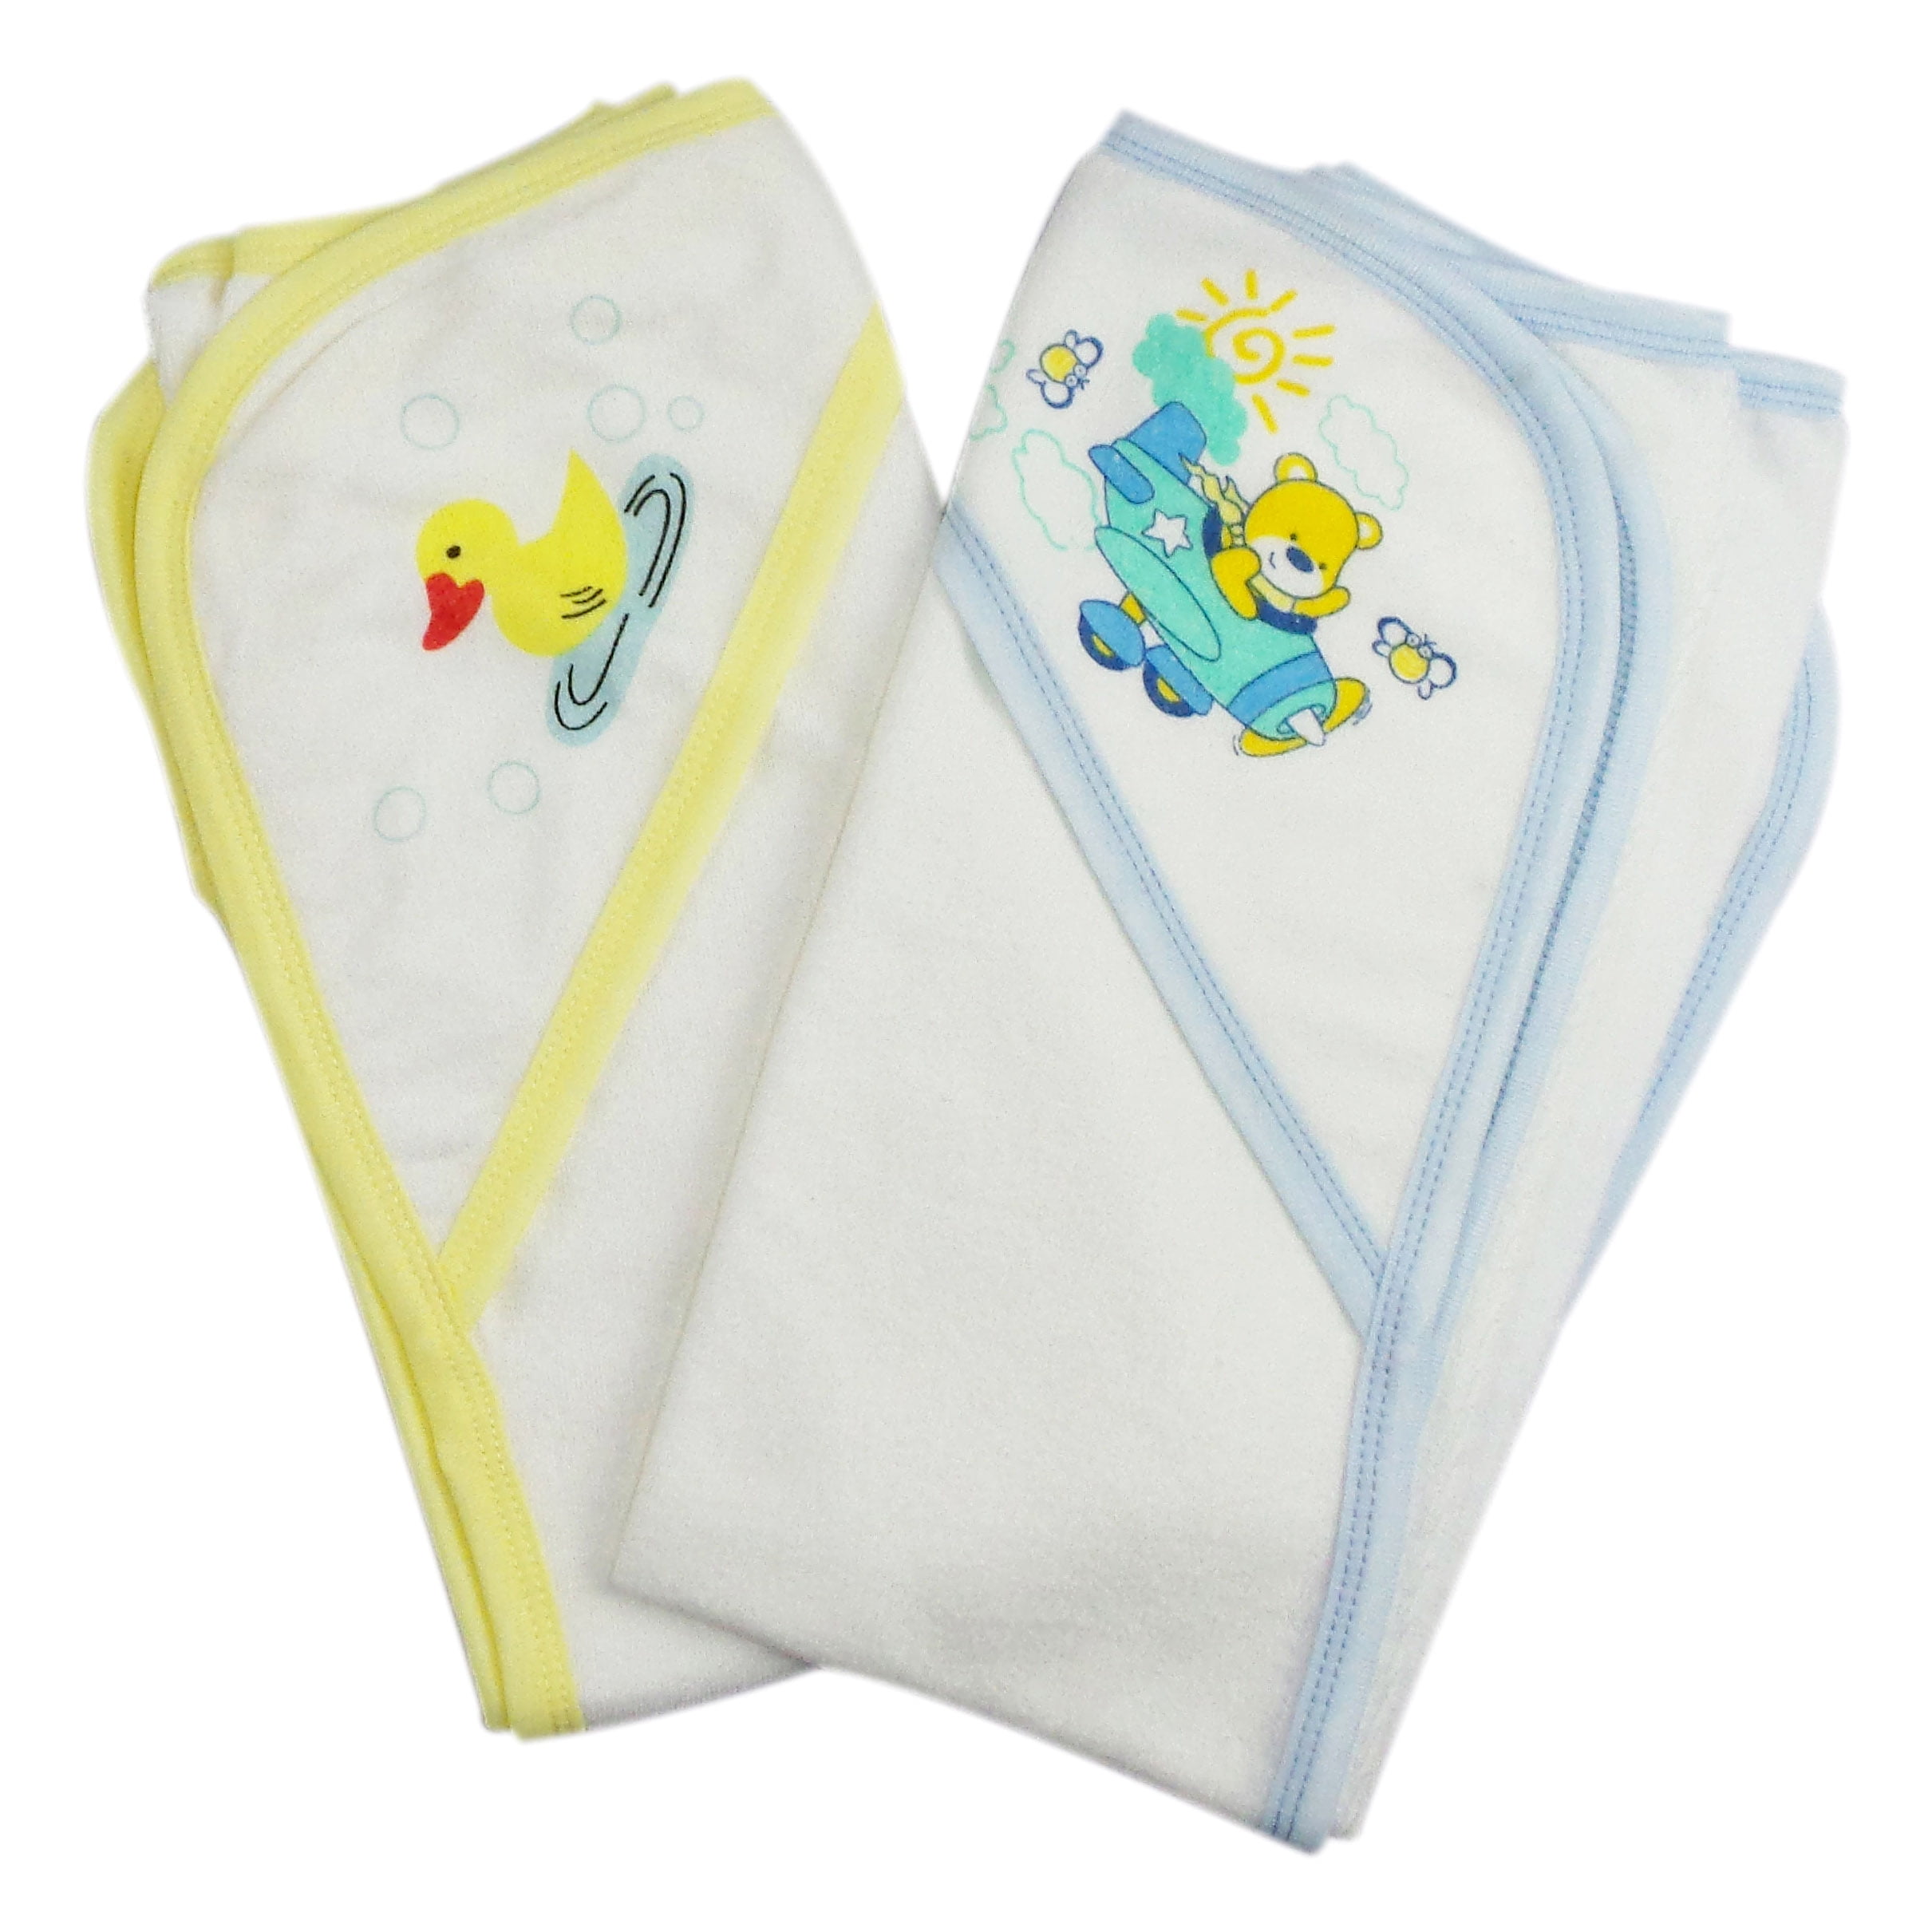 021-yellow-021b-blue Infant Hooded Bath Towel, Yellow - Pack Of 2